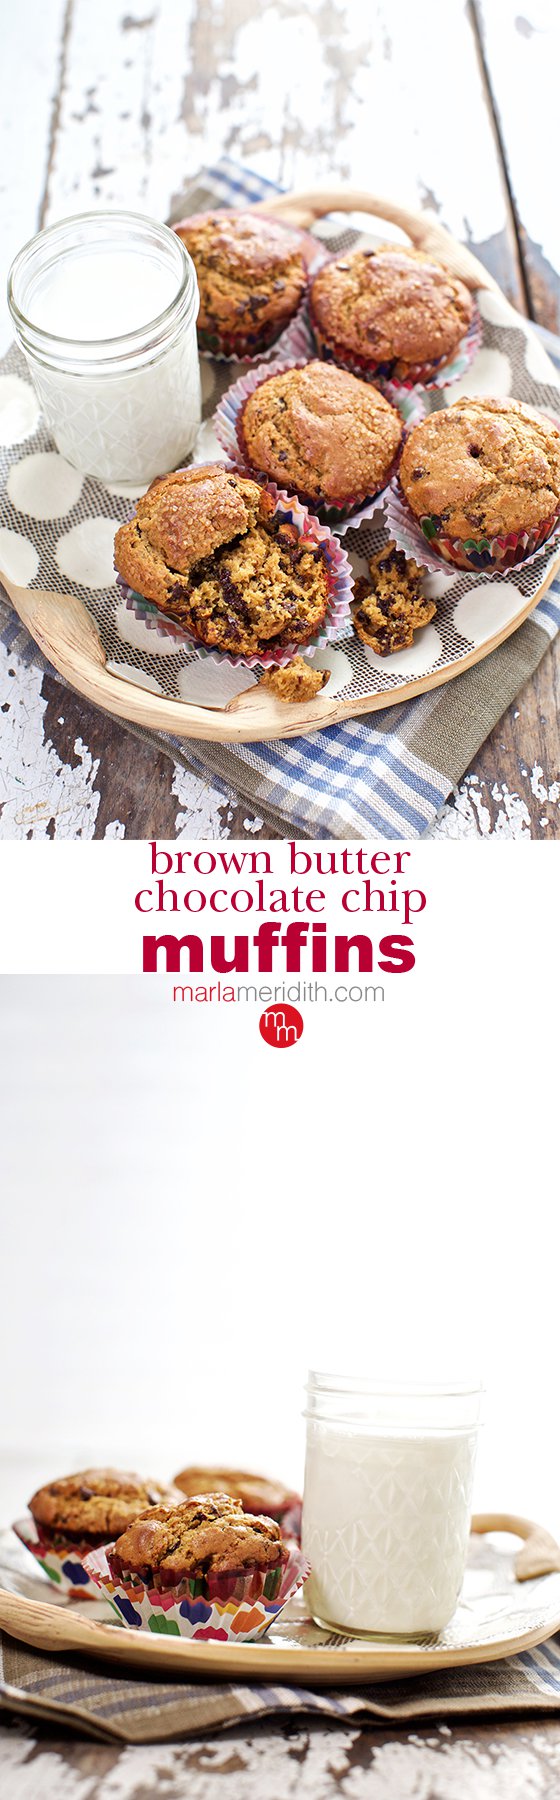 My Brown Butter Chocolate Chip Muffins recipe is melt in your mouth irresistible! Bake some today! MarlaMeridith.com ( @marlameridith )